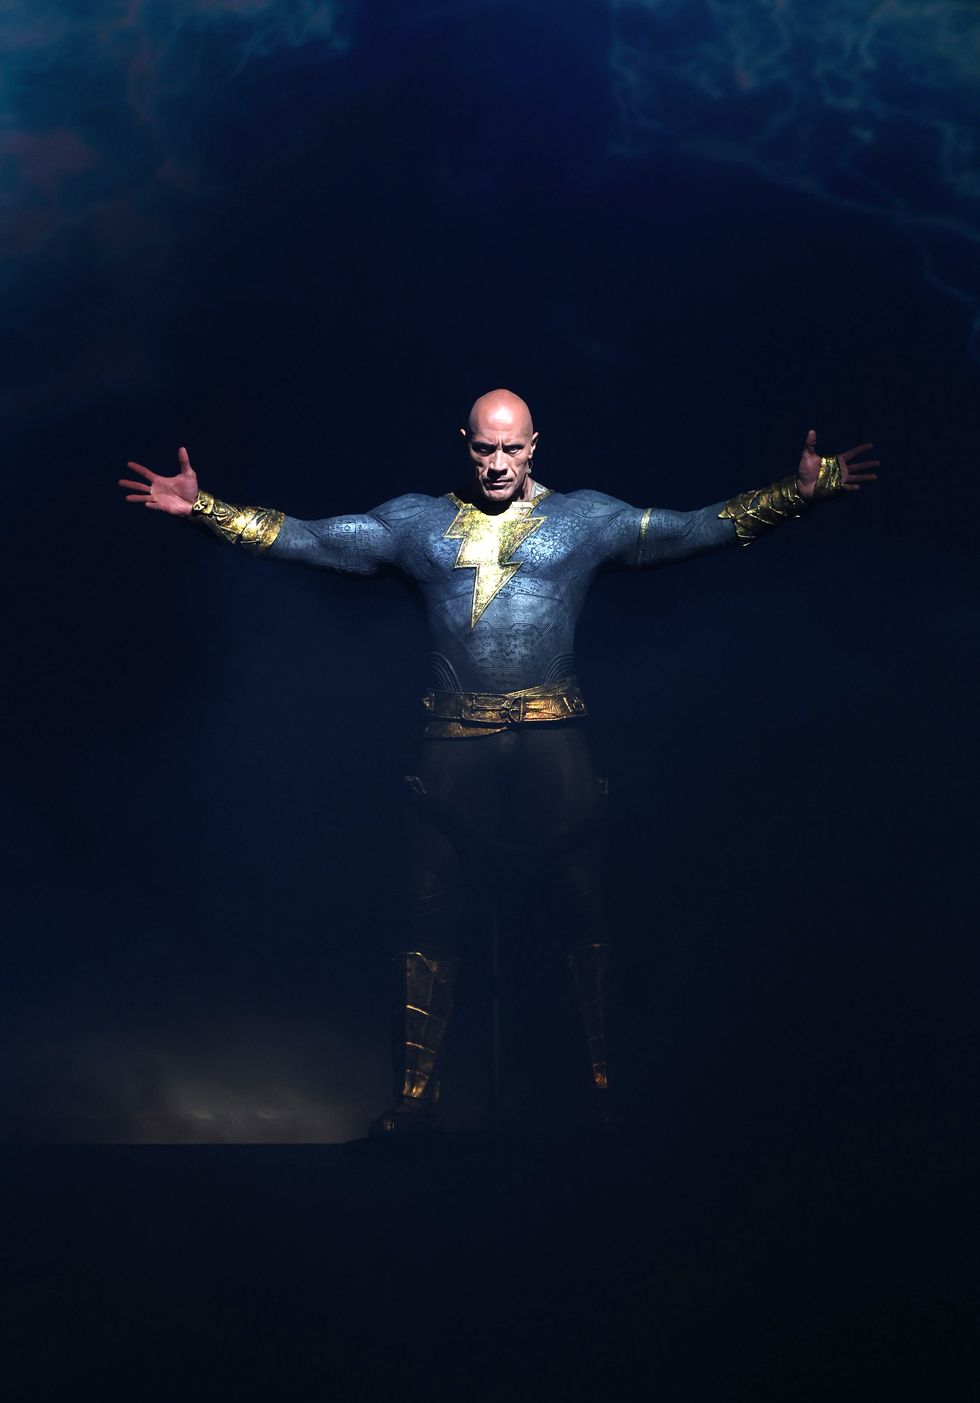 BLACK ADAM Reviews Are in and It Currently Has a 55% Rating on